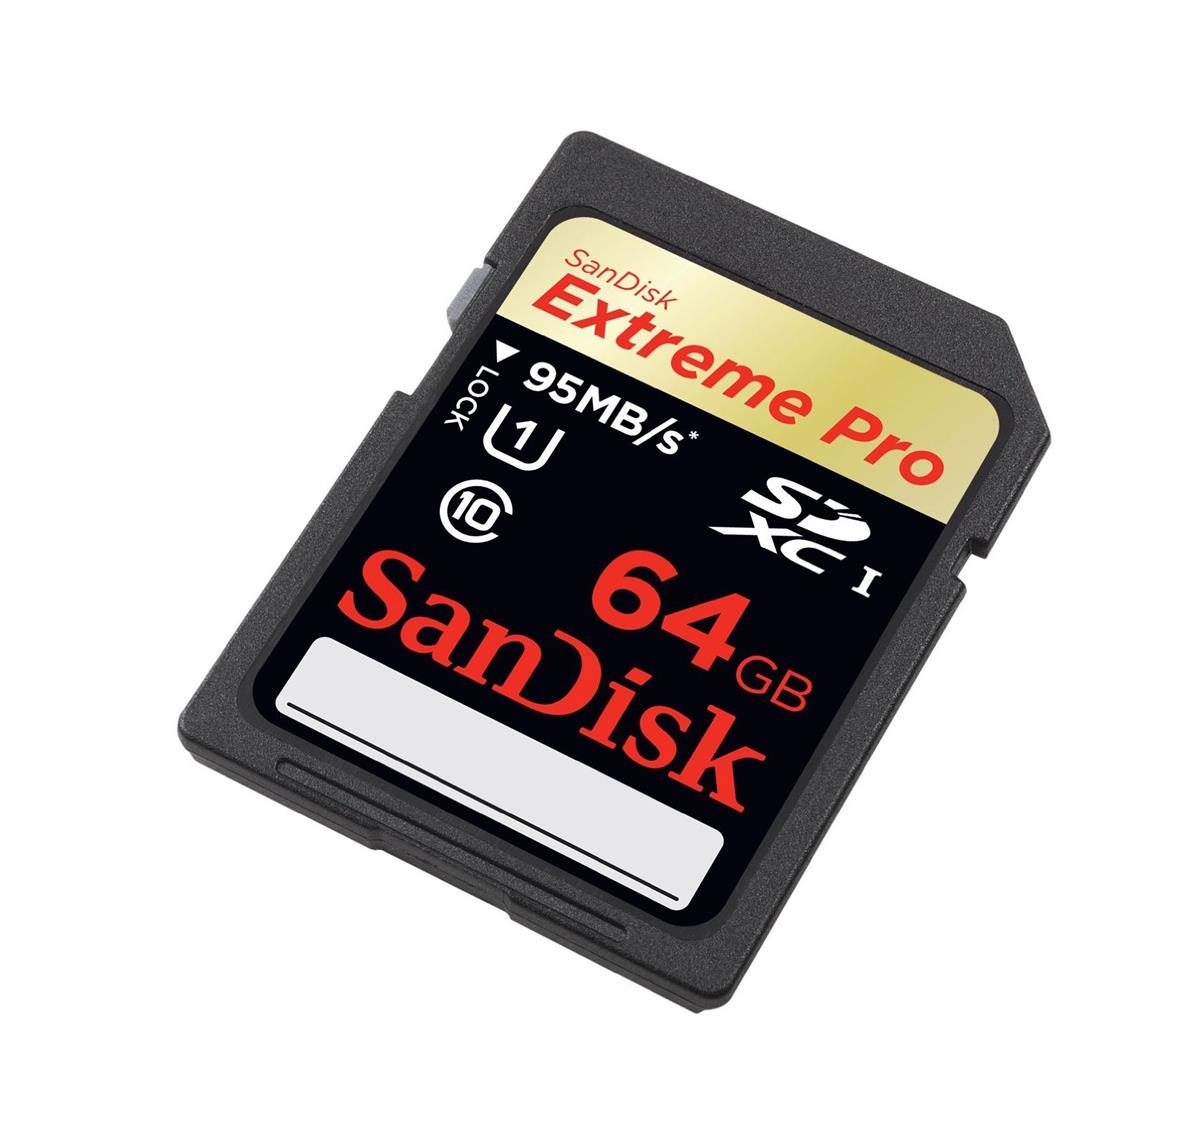 SDSSDXPS-240G-G25 | SanDisk Extreme PRO 240GB SATA 6Gb/s 2.5 Solid State Drive (SSD)